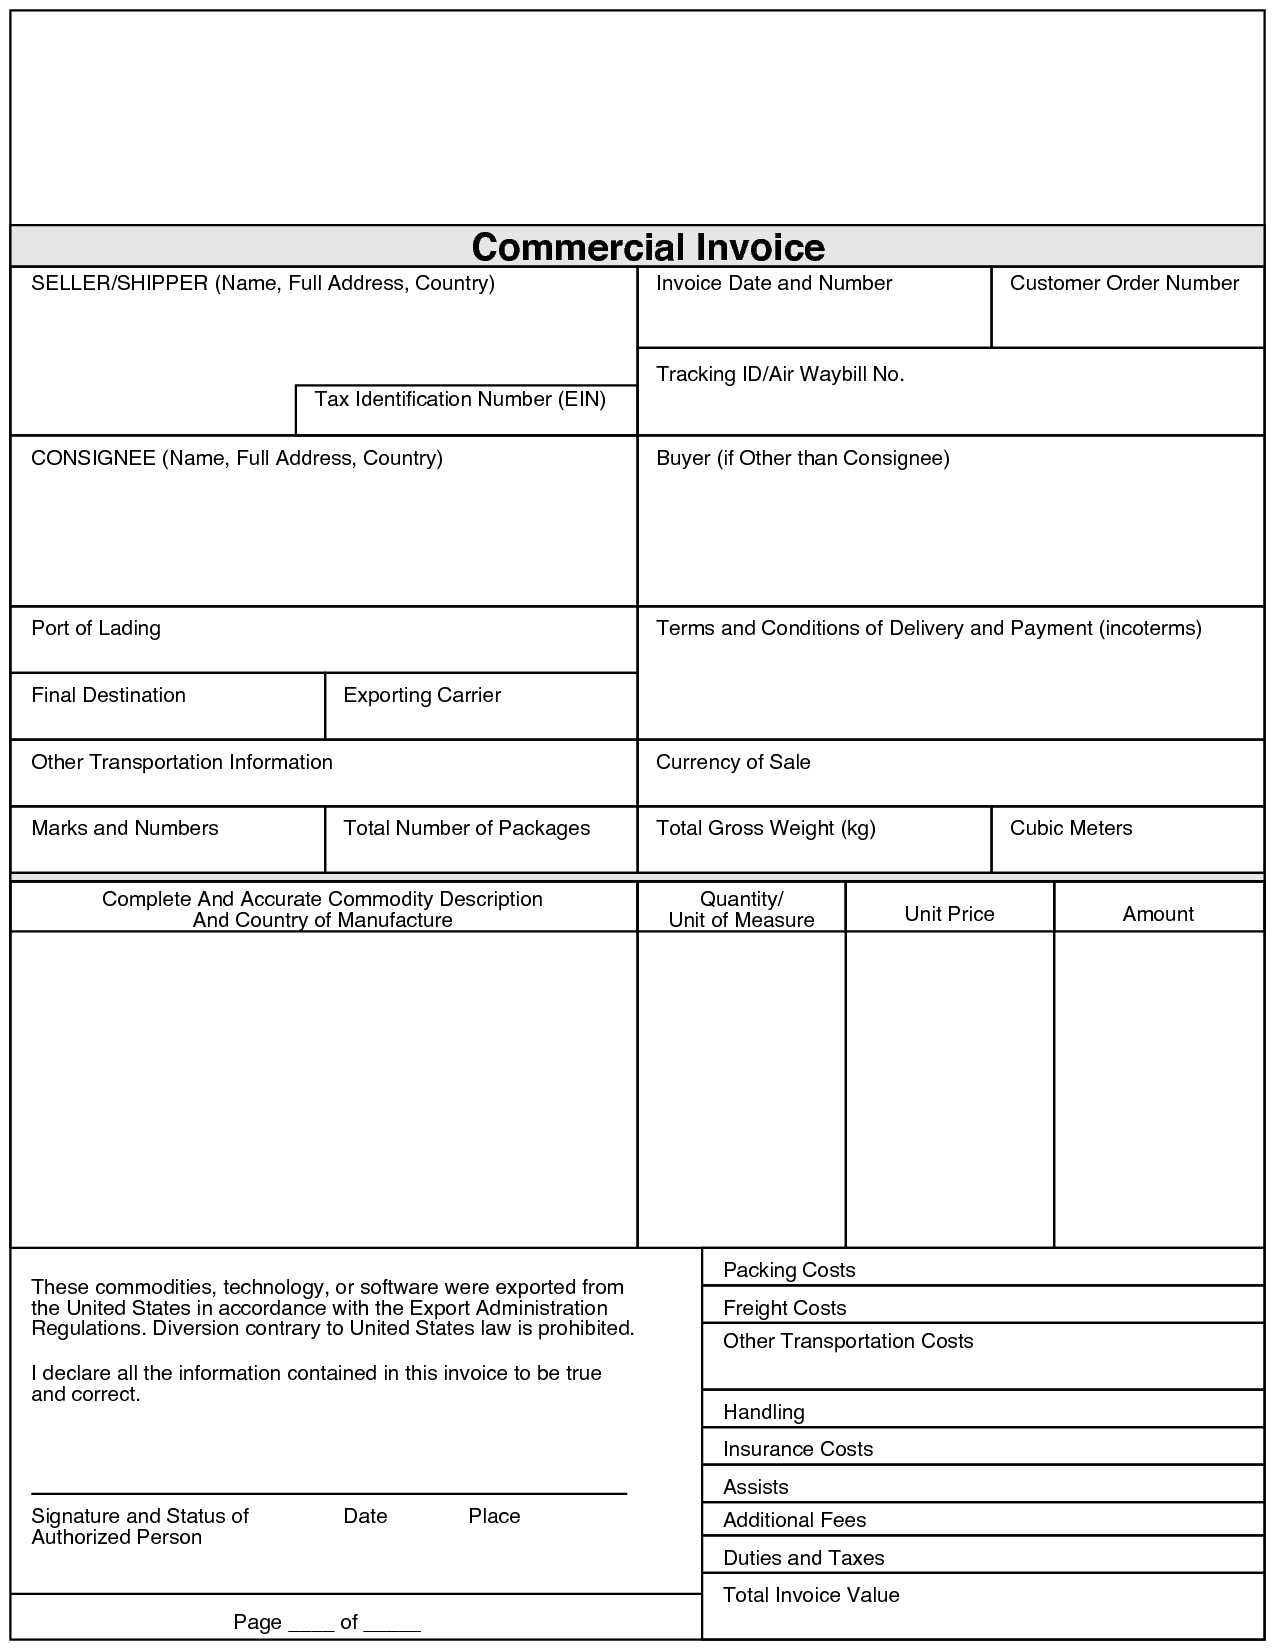 federal express commercial invoice fedex commercial invoice printable invoice template 1275 X 1650